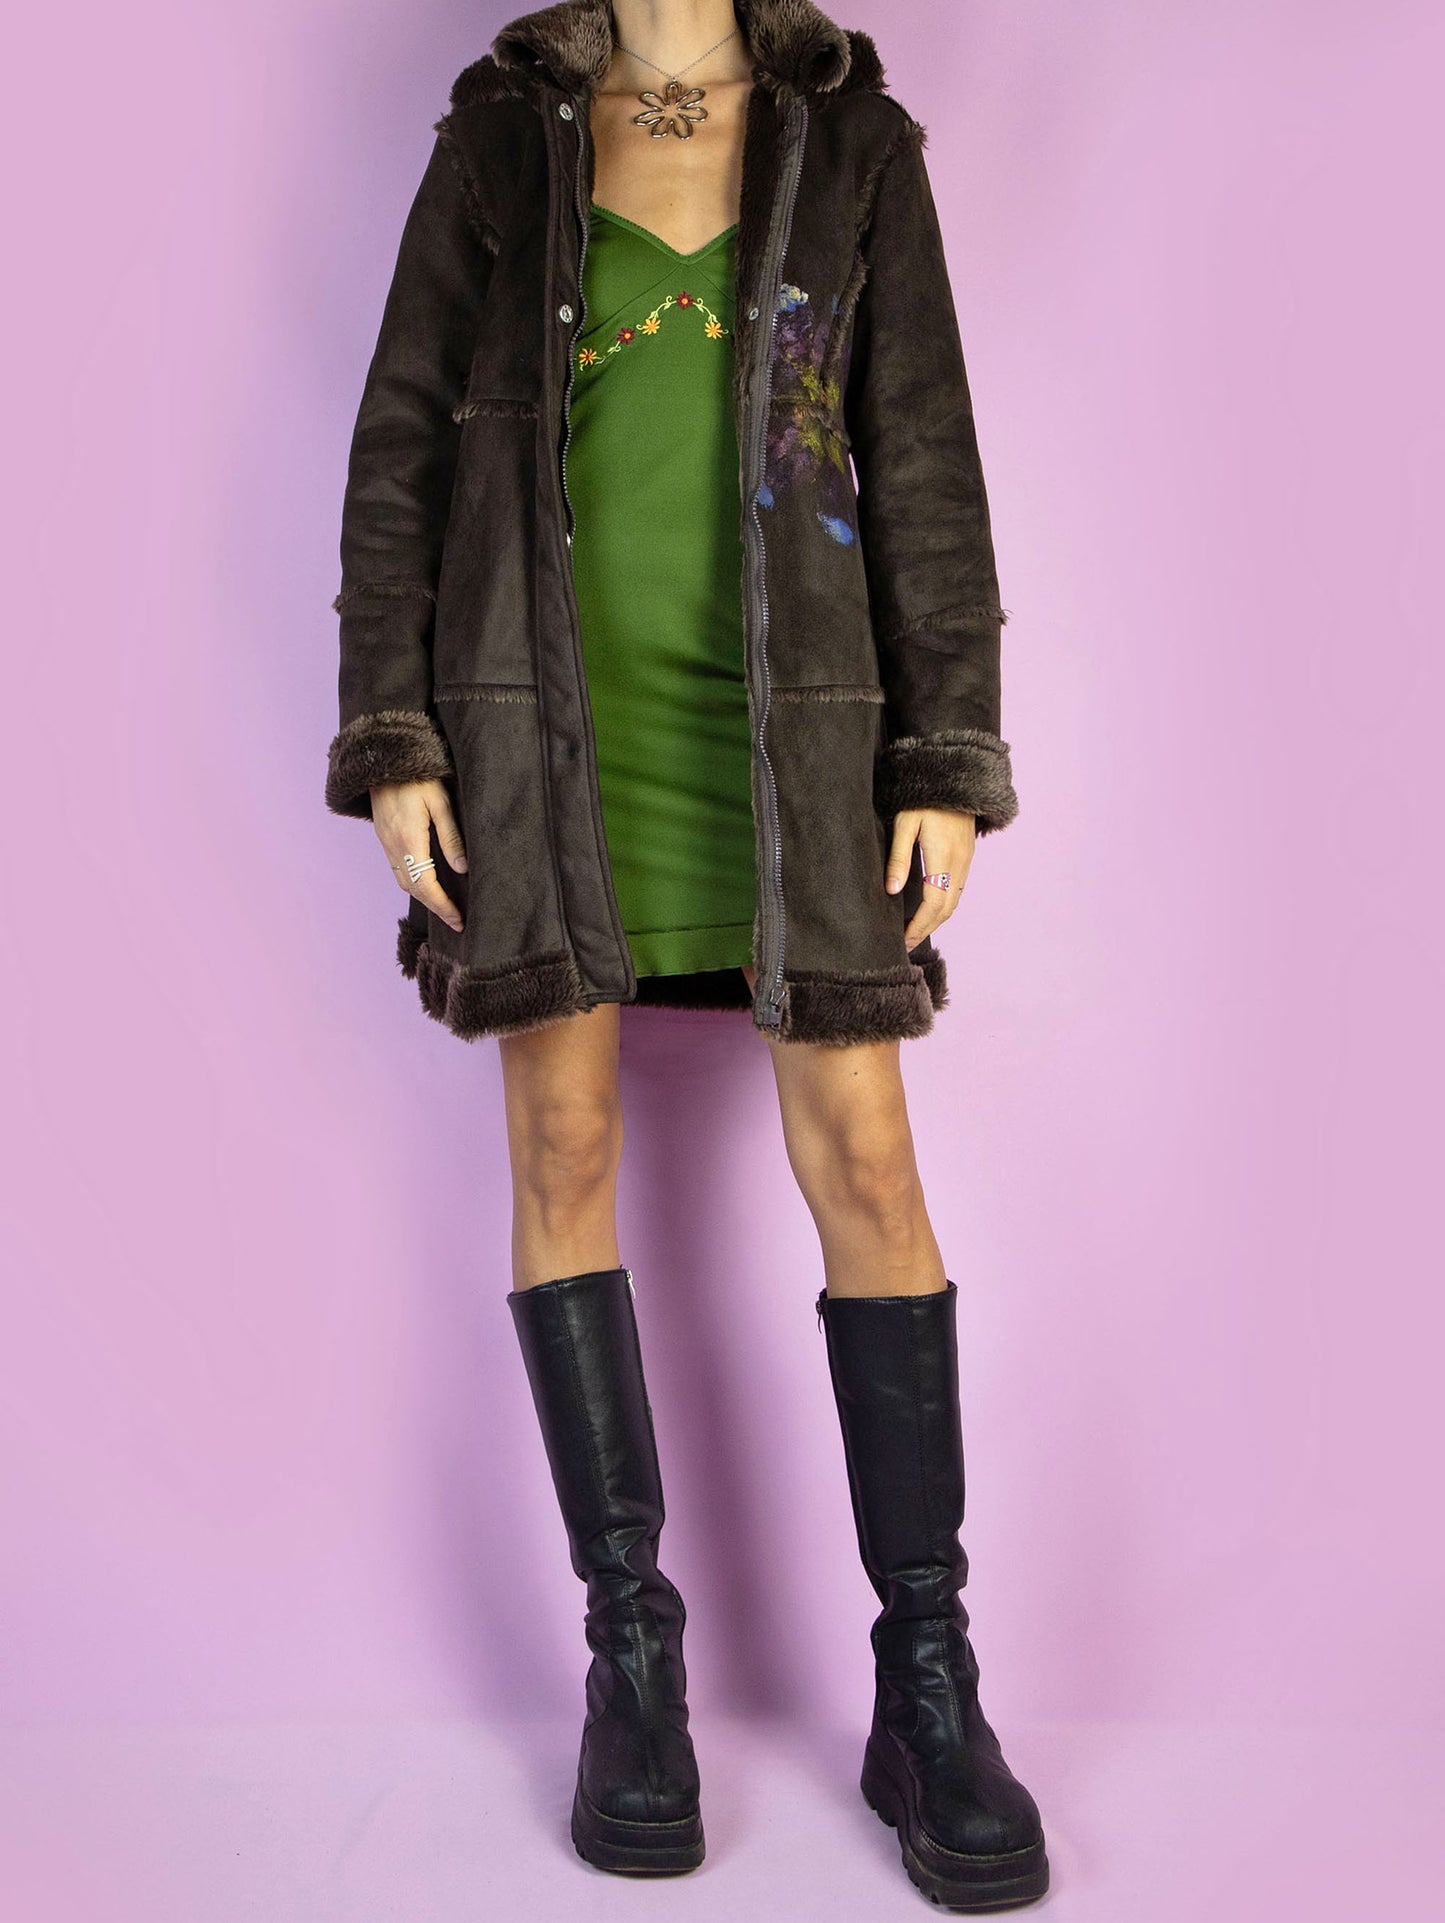 The Y2K Dark Brown Penny Lane Coat is a vintage faux suede coat with a collar, cuffs, and faux fur lining, zipper closure, and a hood. Fairy Grunge whimsygoth 2000s afghan-inspired winter statement jacket.